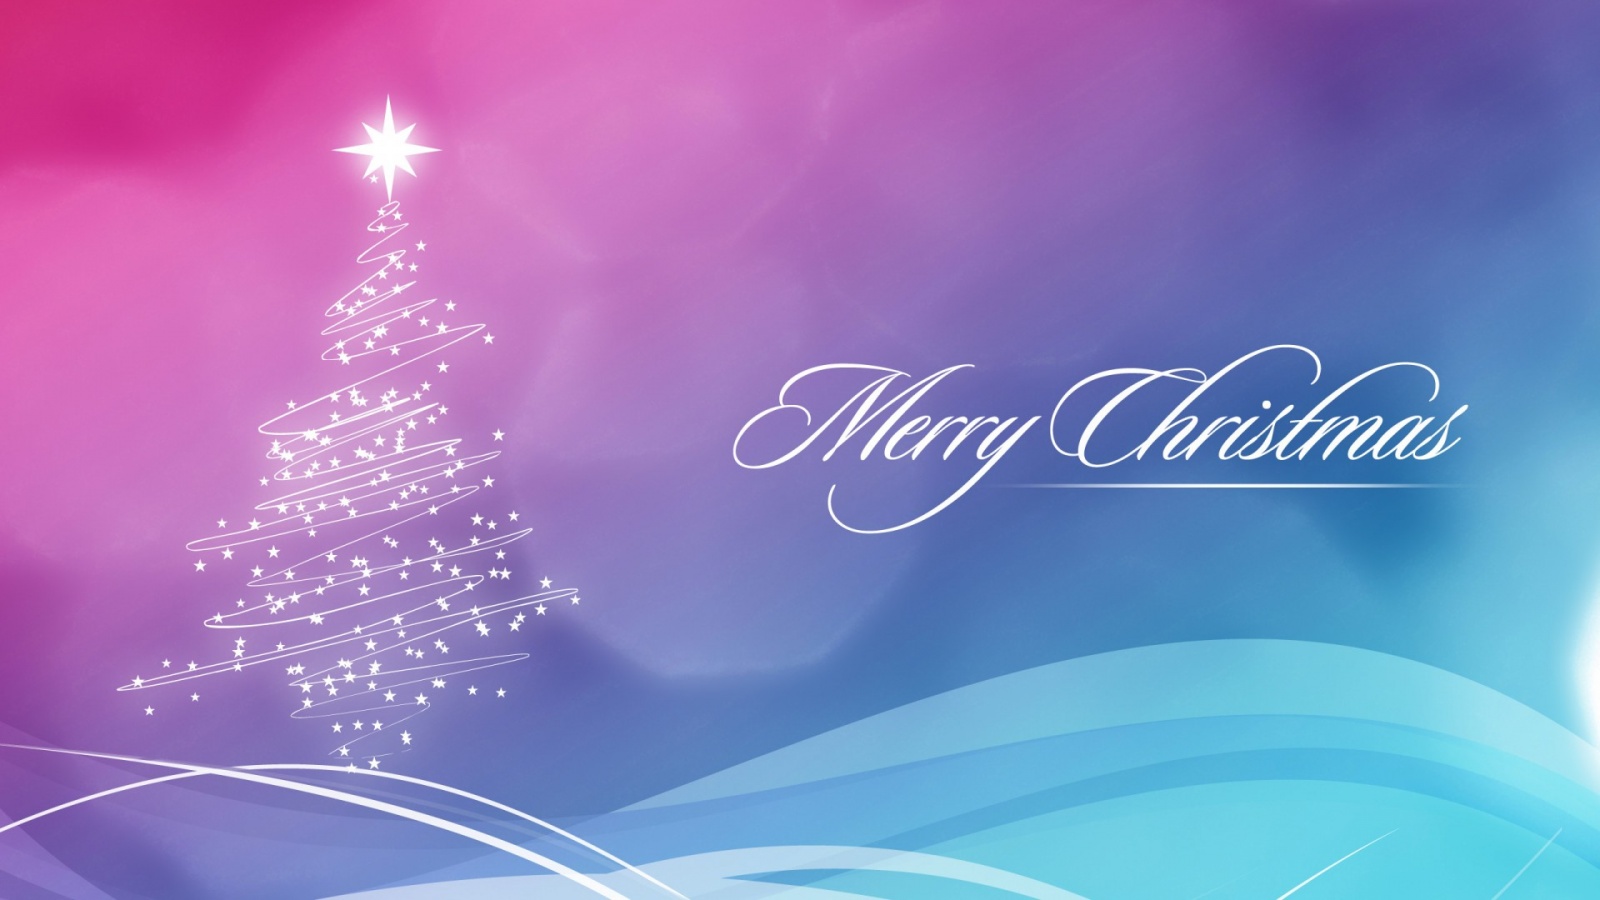 Merry Christmas Cards Wallpaper